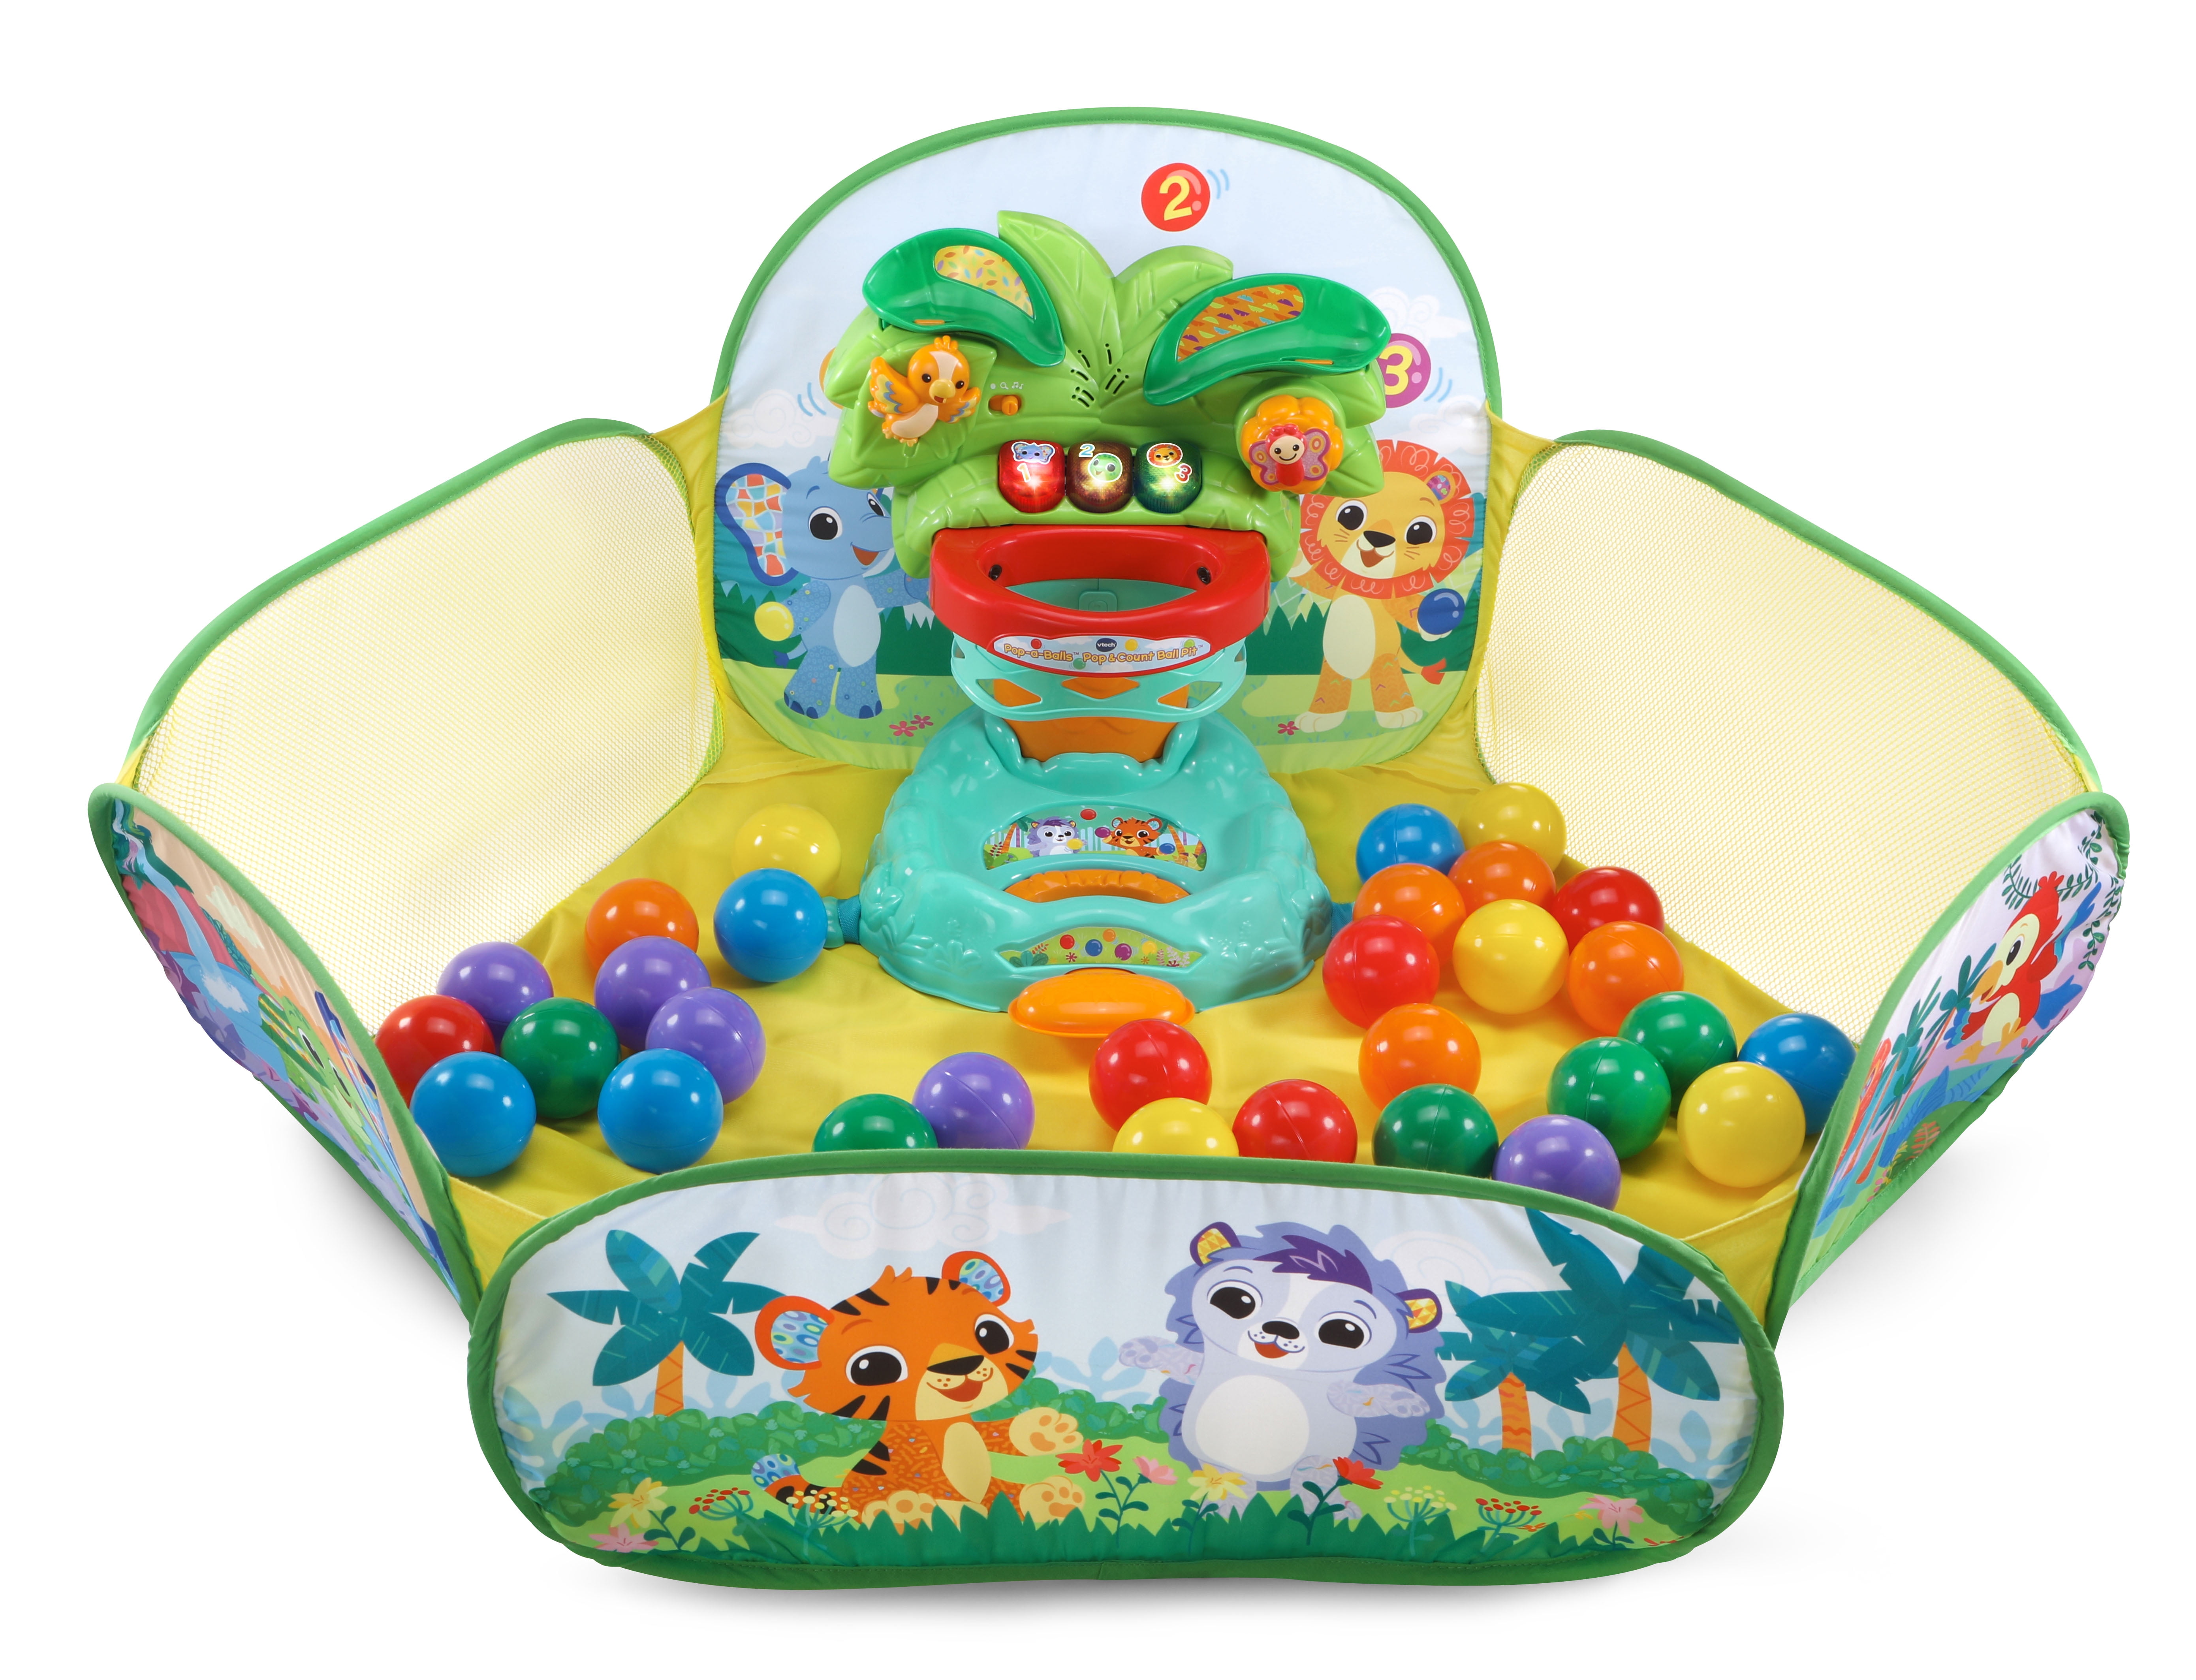 VTech Pop-a-Balls Pop and Count Ball Pit Learning Toy With 30 Balls, Walmart Exclusive